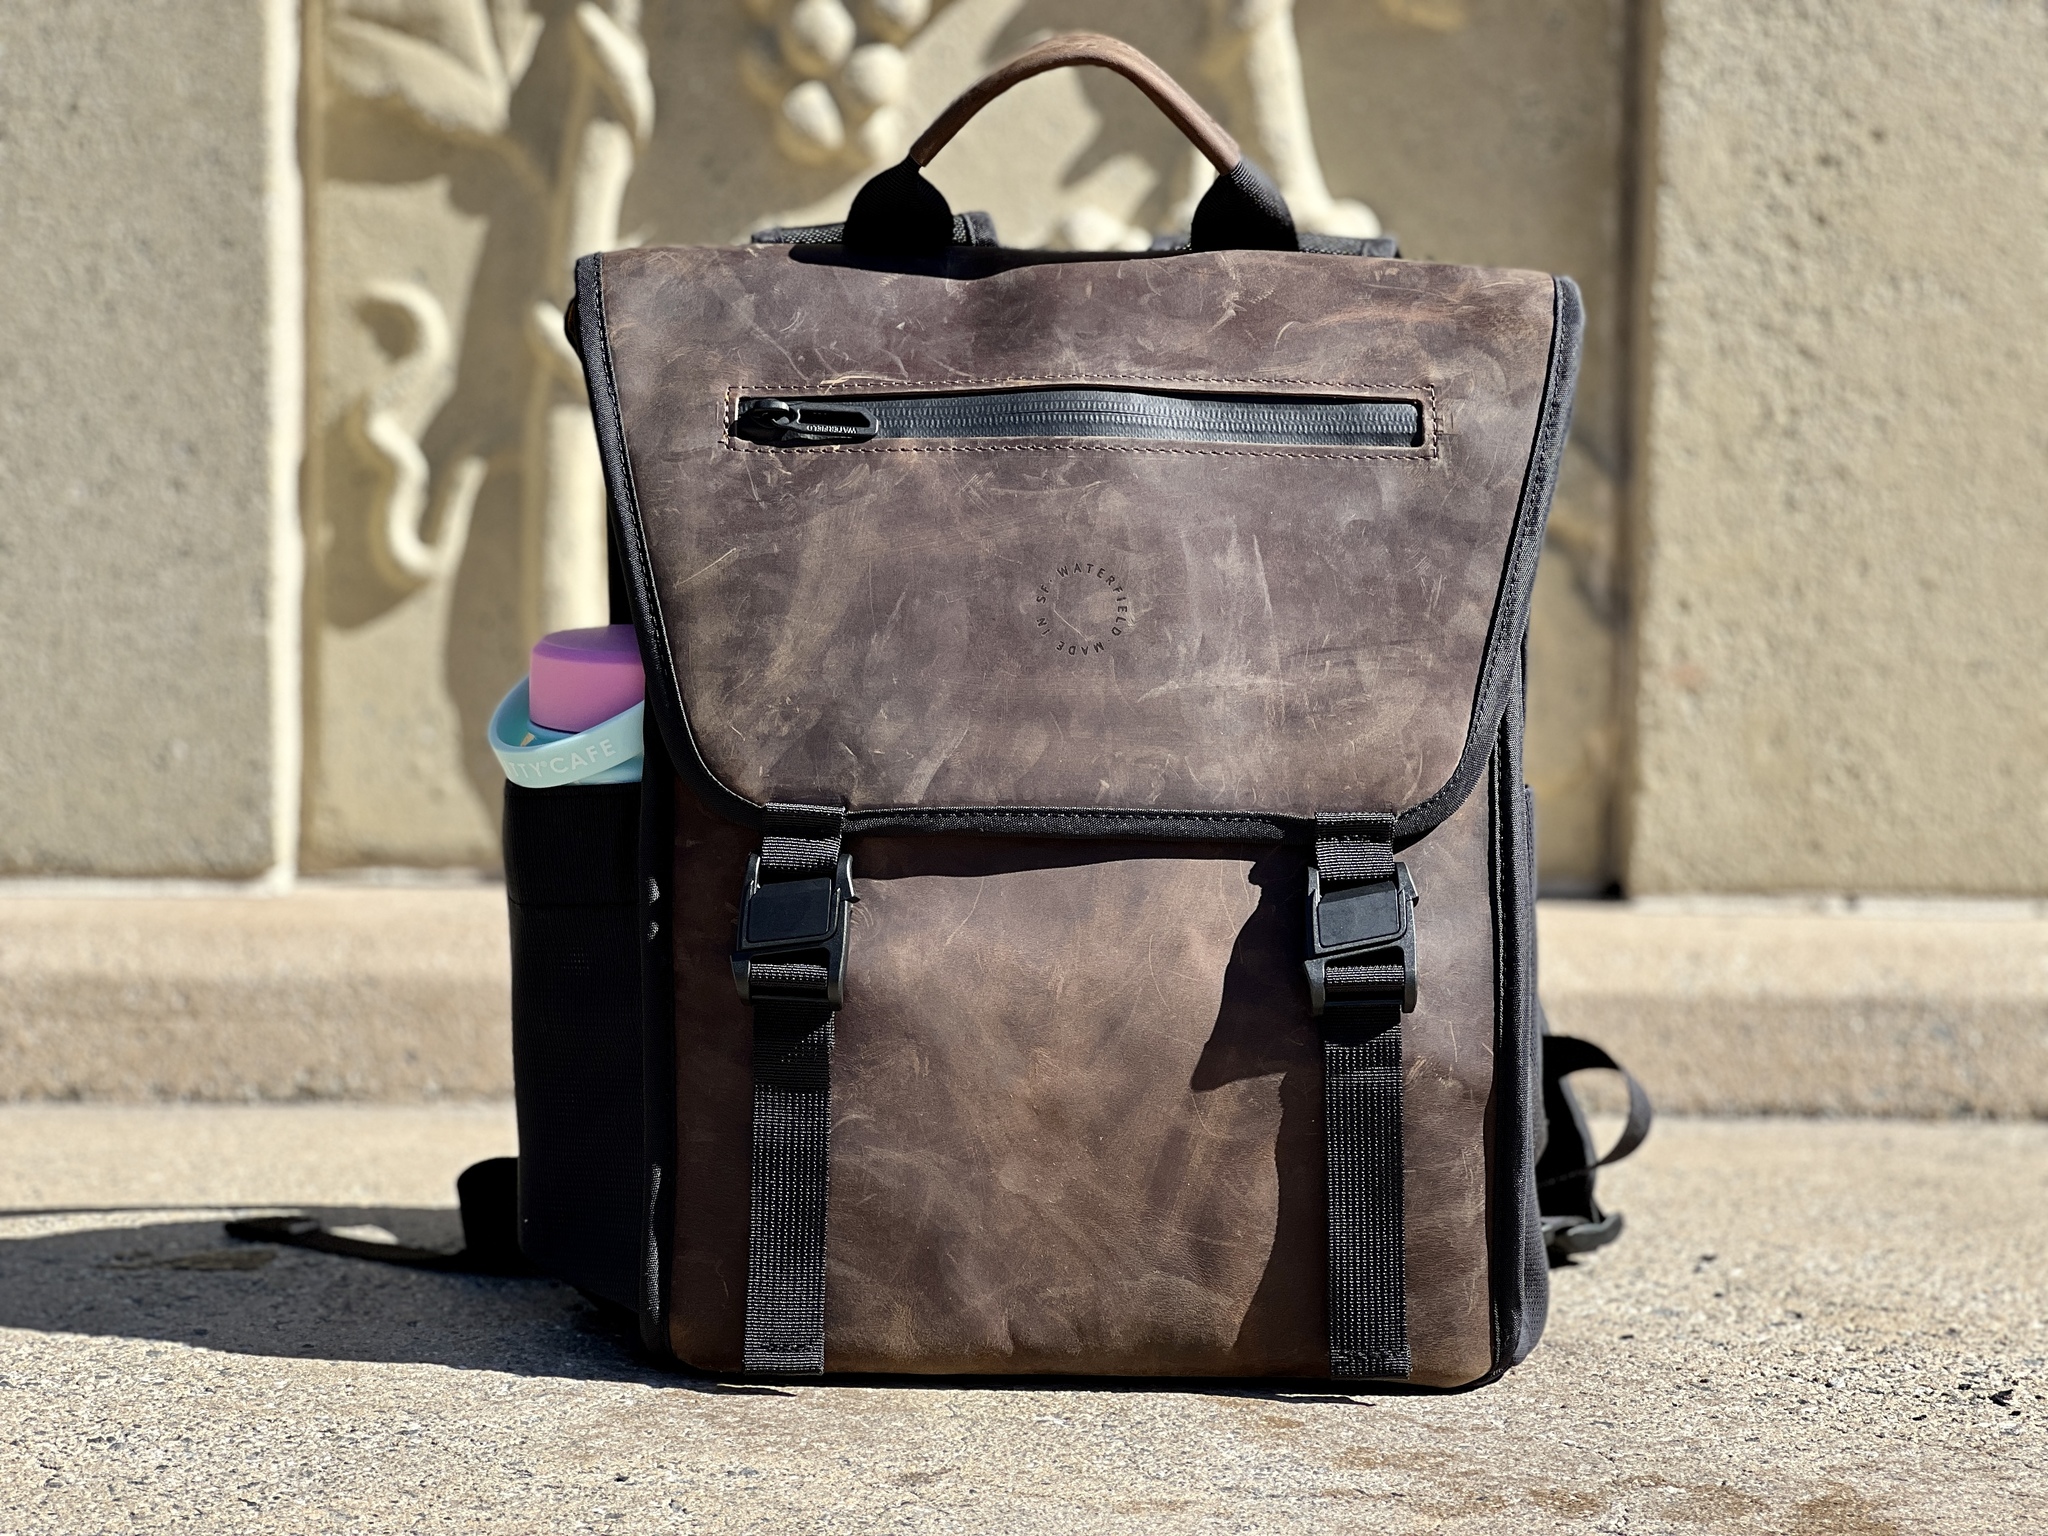 WaterField Designs Tuck Backpack review: Compact, expandable